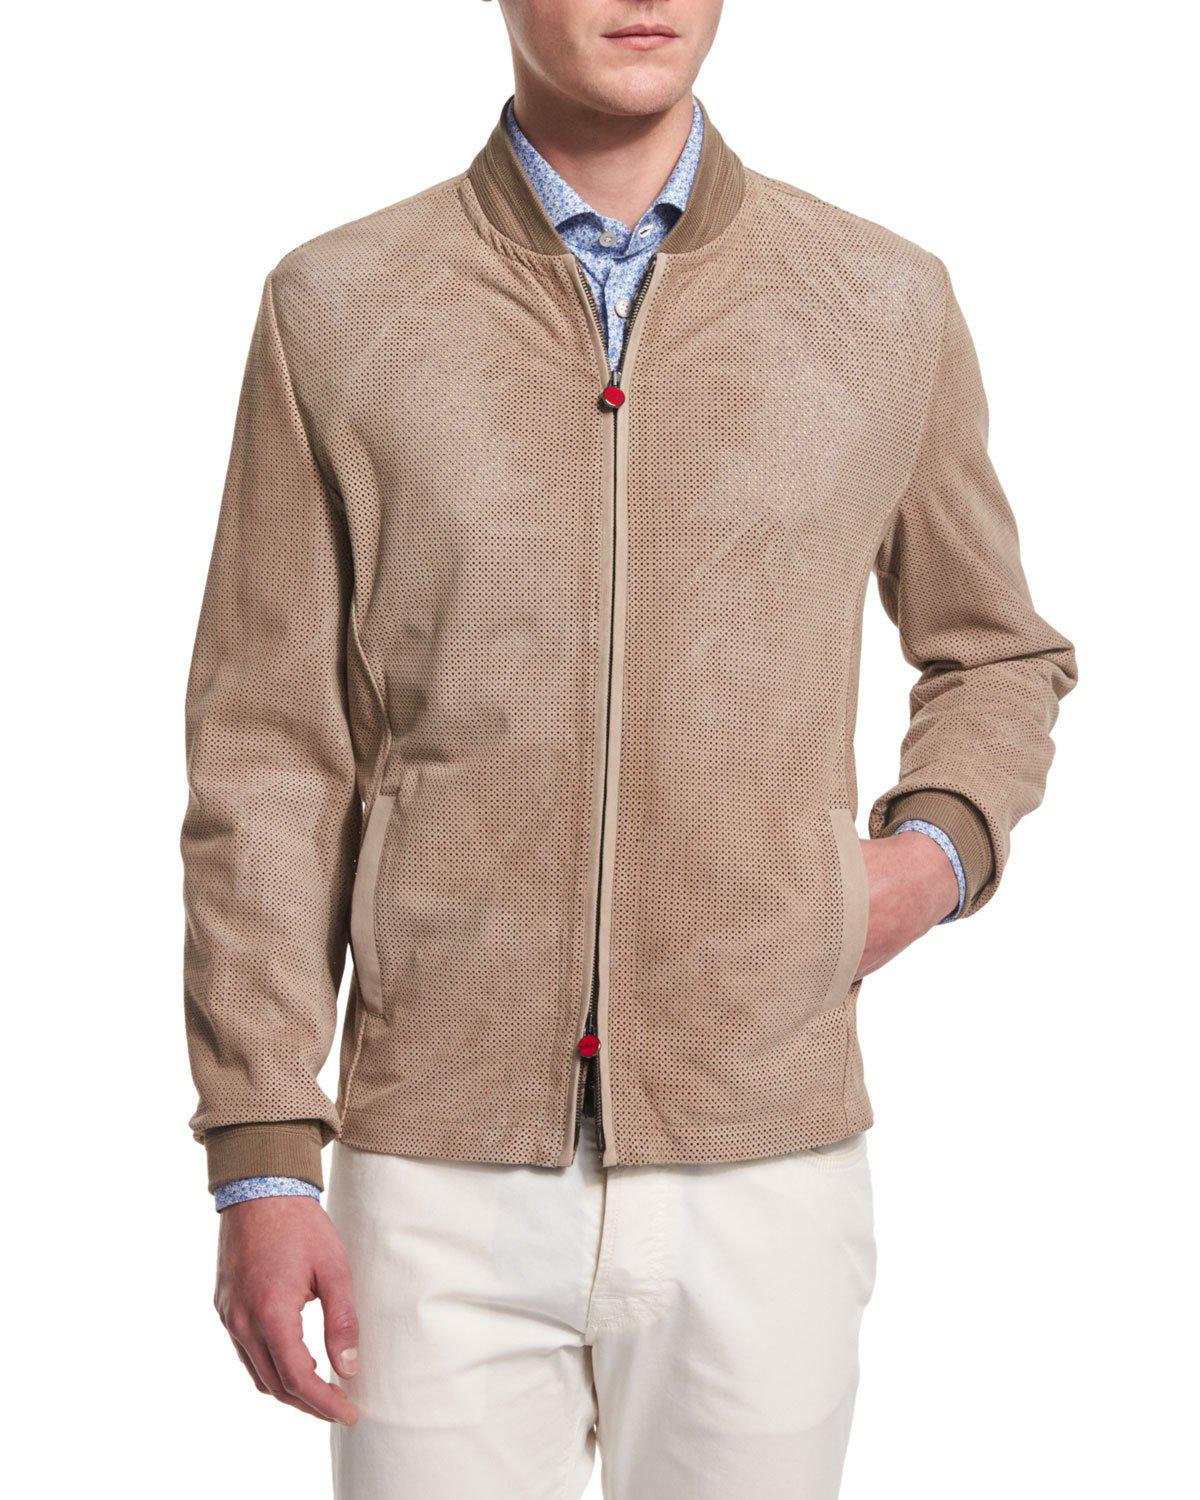 Kiton Perforated Suede Bomber Jacket in Brown for Men - Lyst